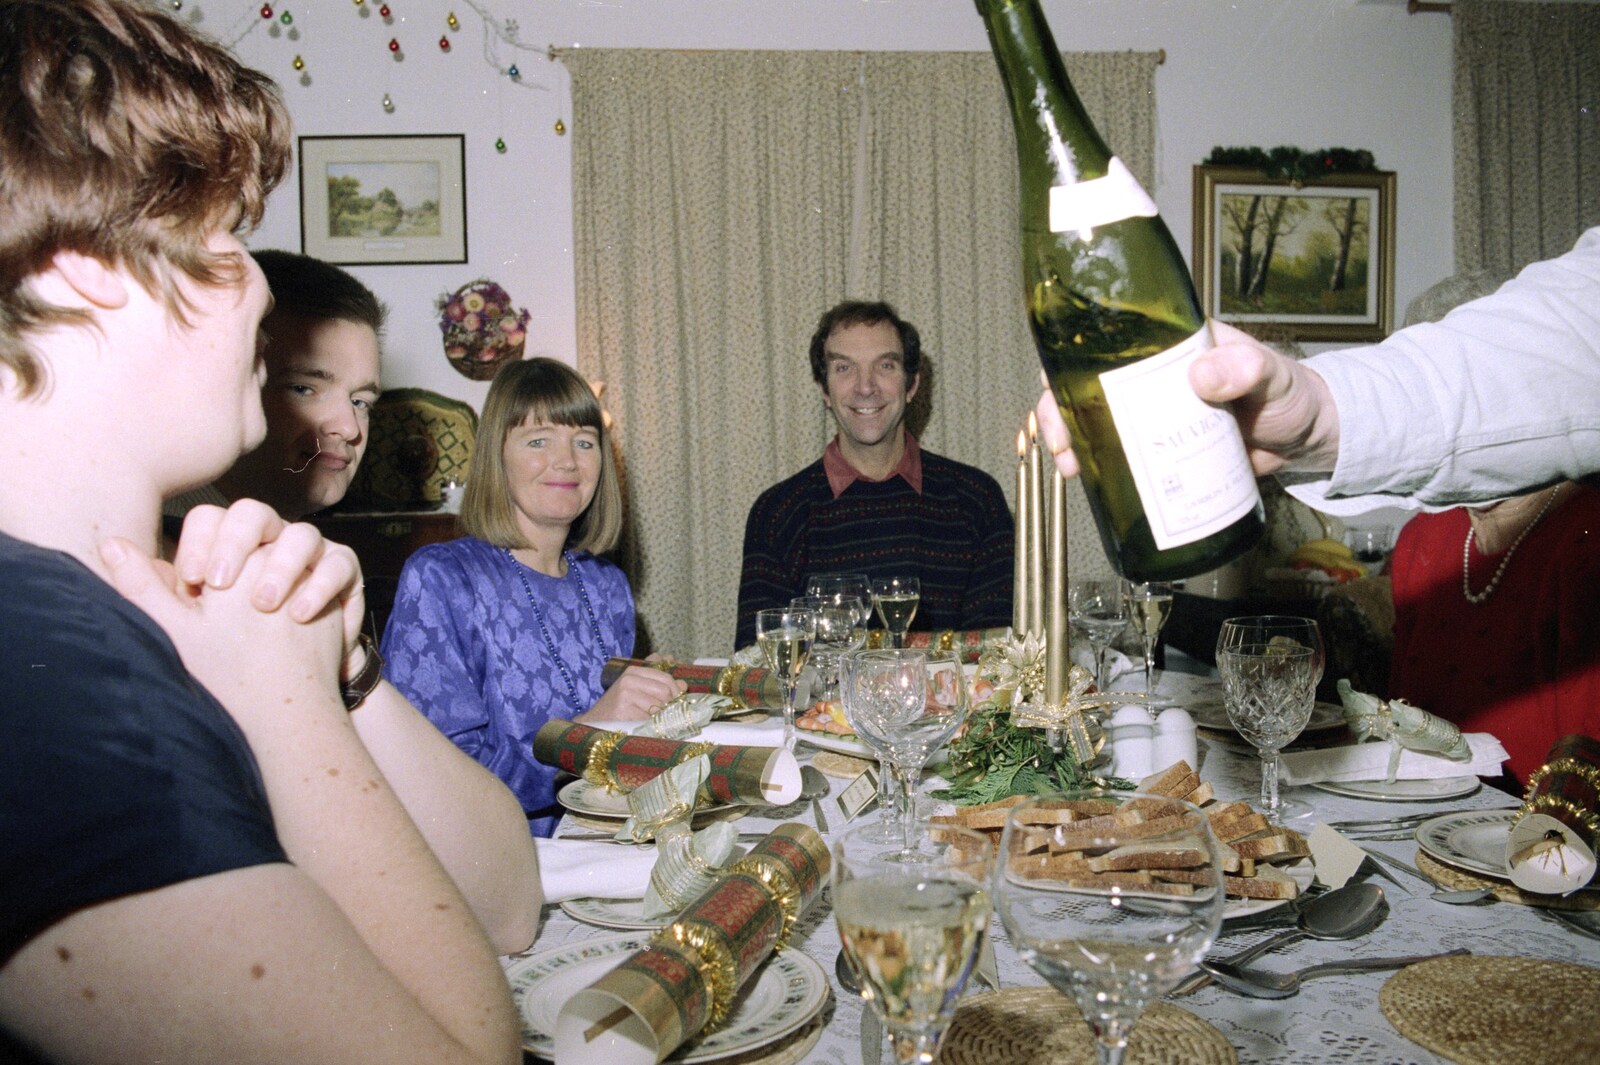 Neil pours out a spot of Sauvignon from Christmas Down South, Burton and Walkford, Dorset - 25th December 1994